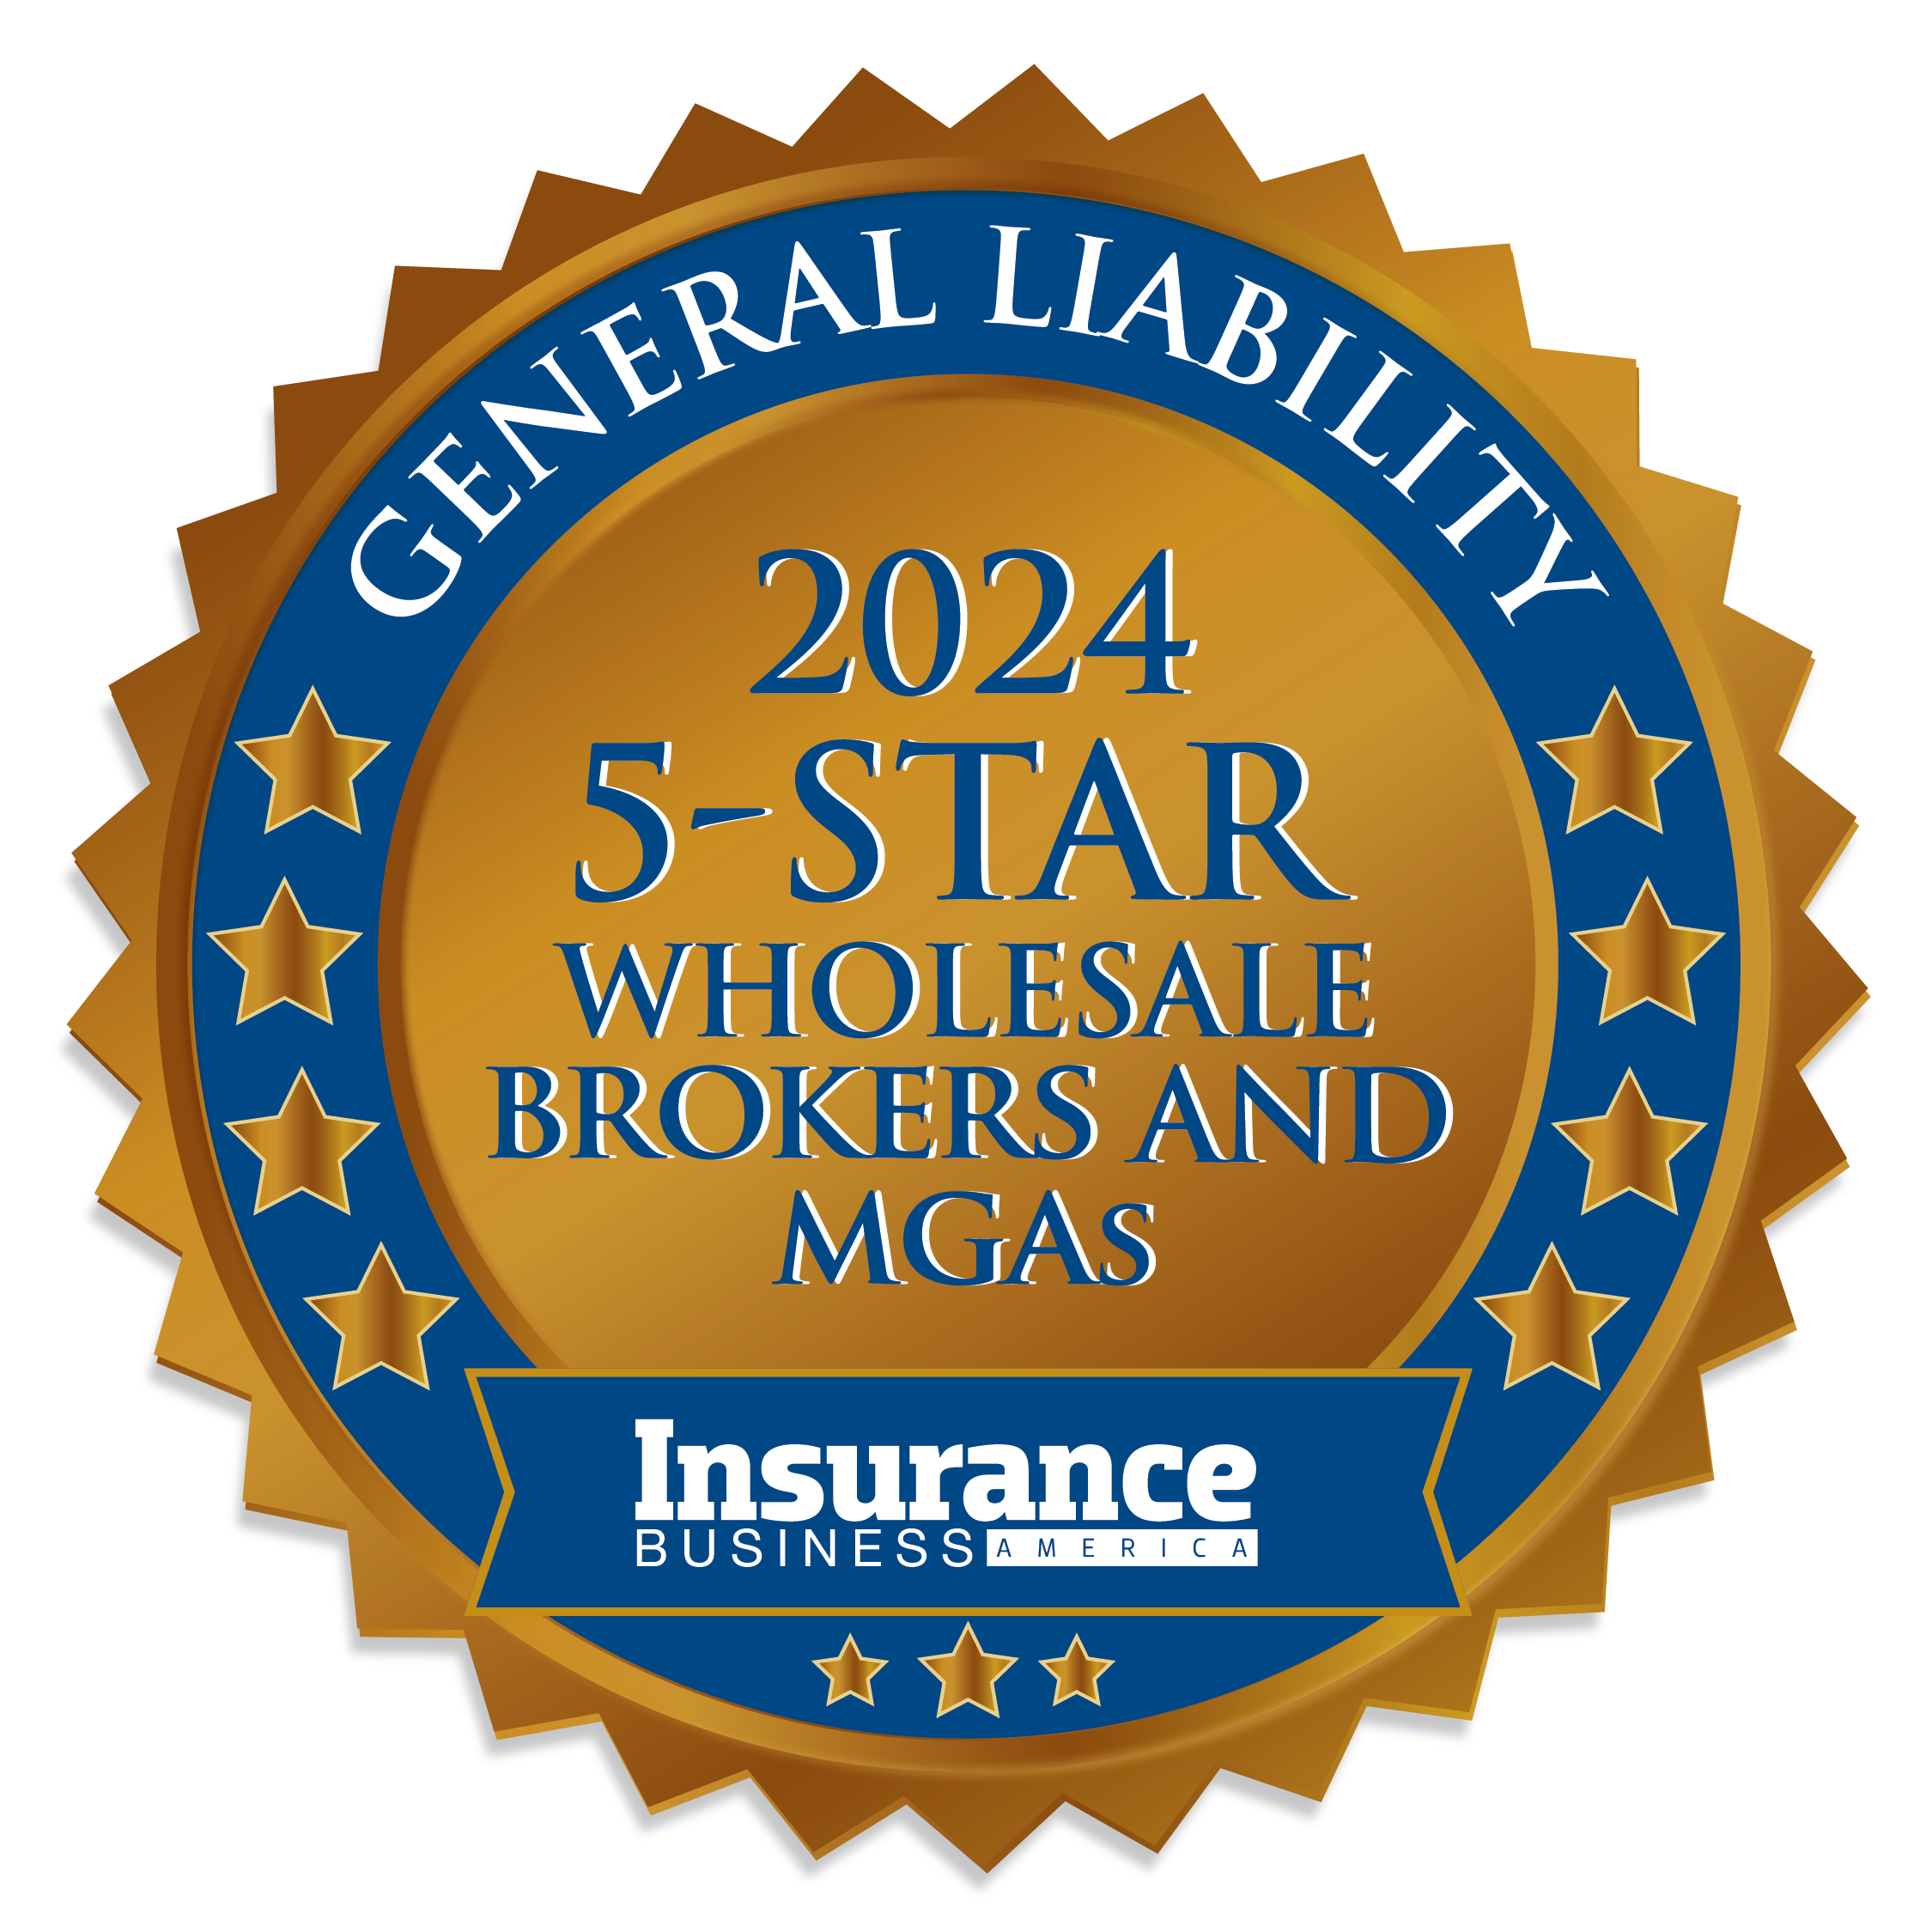 IBA 5-Star Wholesale Brokers and MGA 2024 General Liability BRONZE